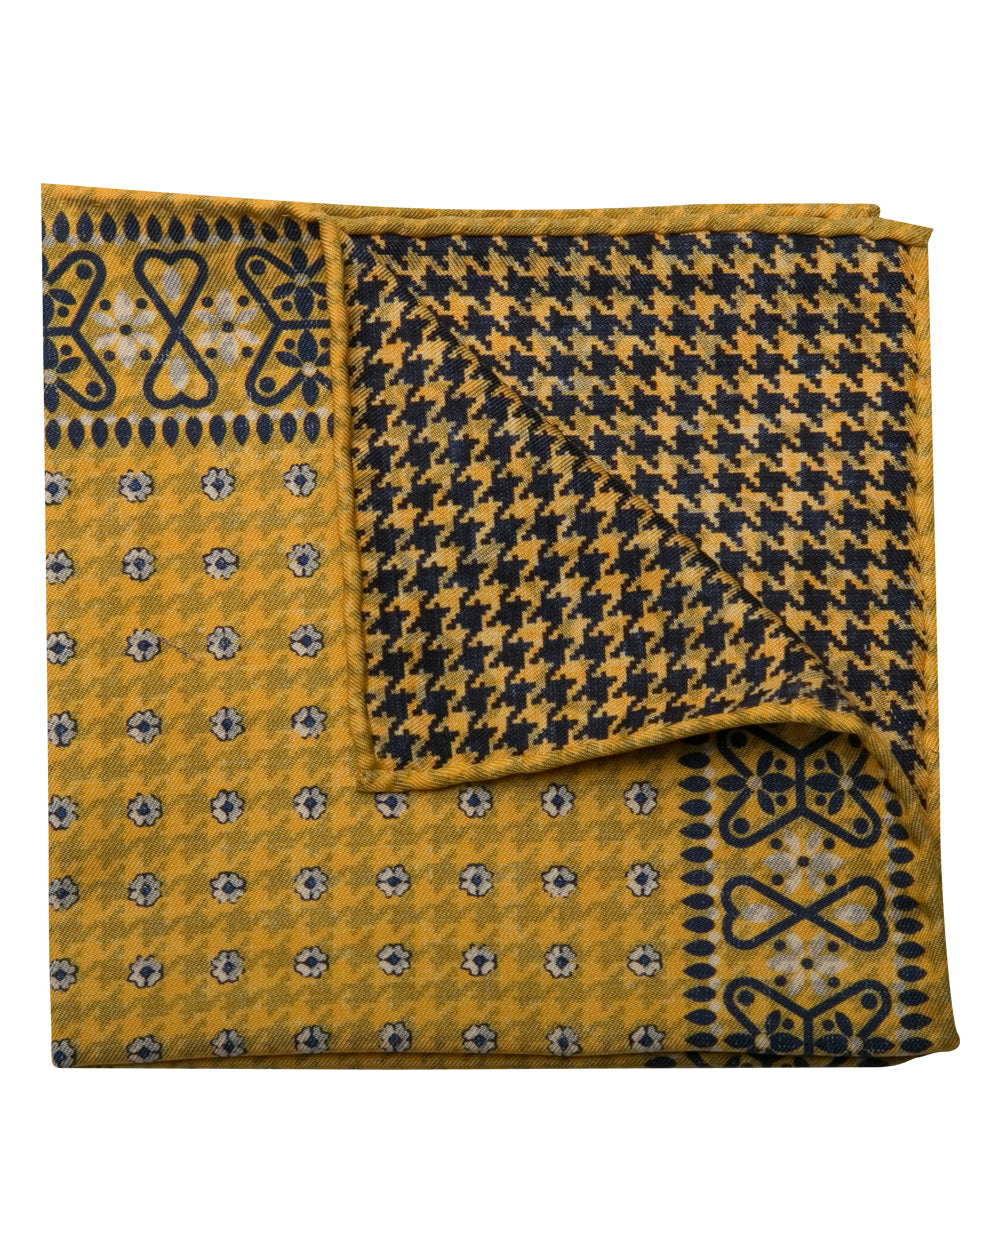 Mini Floral and Persian Pocket Square in Yellow and Navy